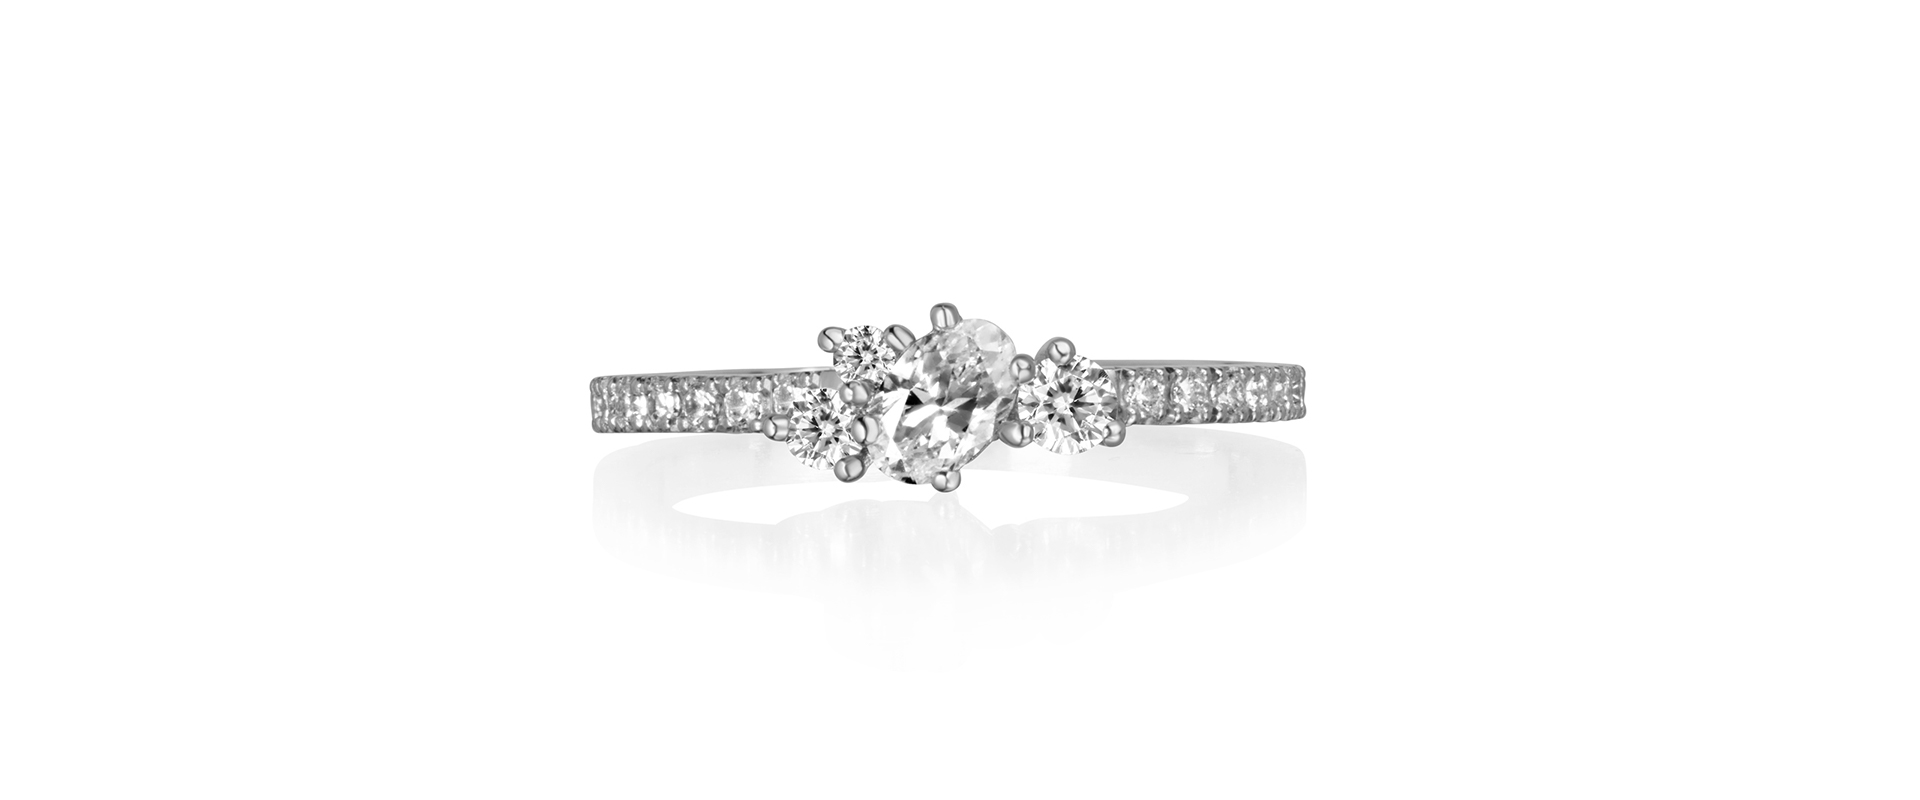 Astral cluster engagement ring 3 with oval and round diamonds - platinum